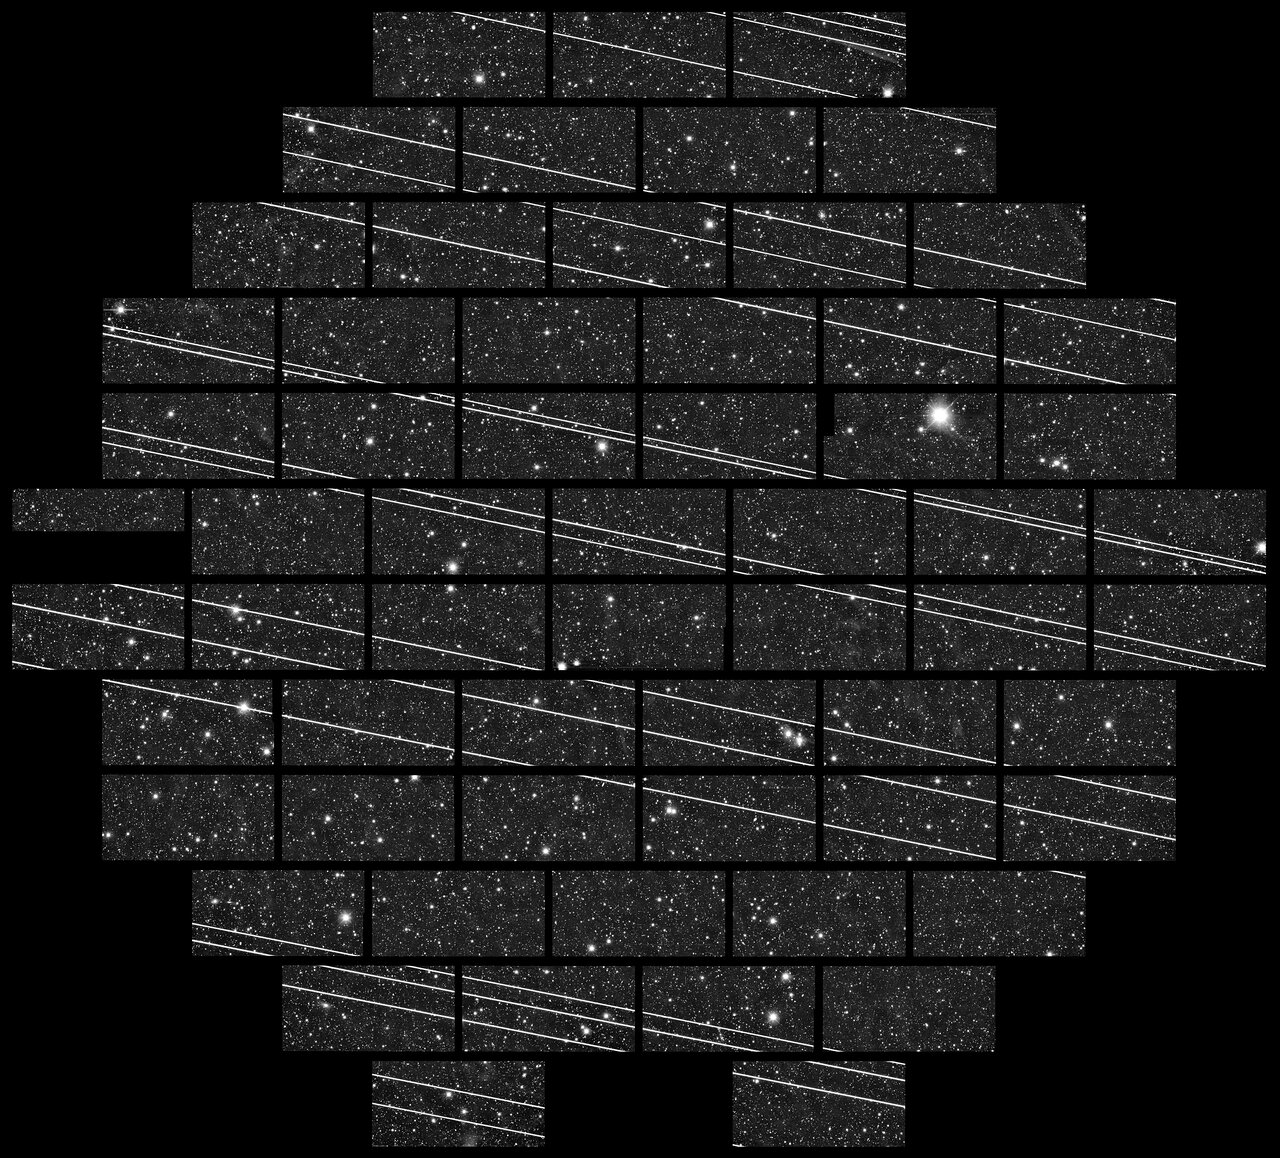 mosaic image of b&w starry sky with more than a dozen bright satellite streaks